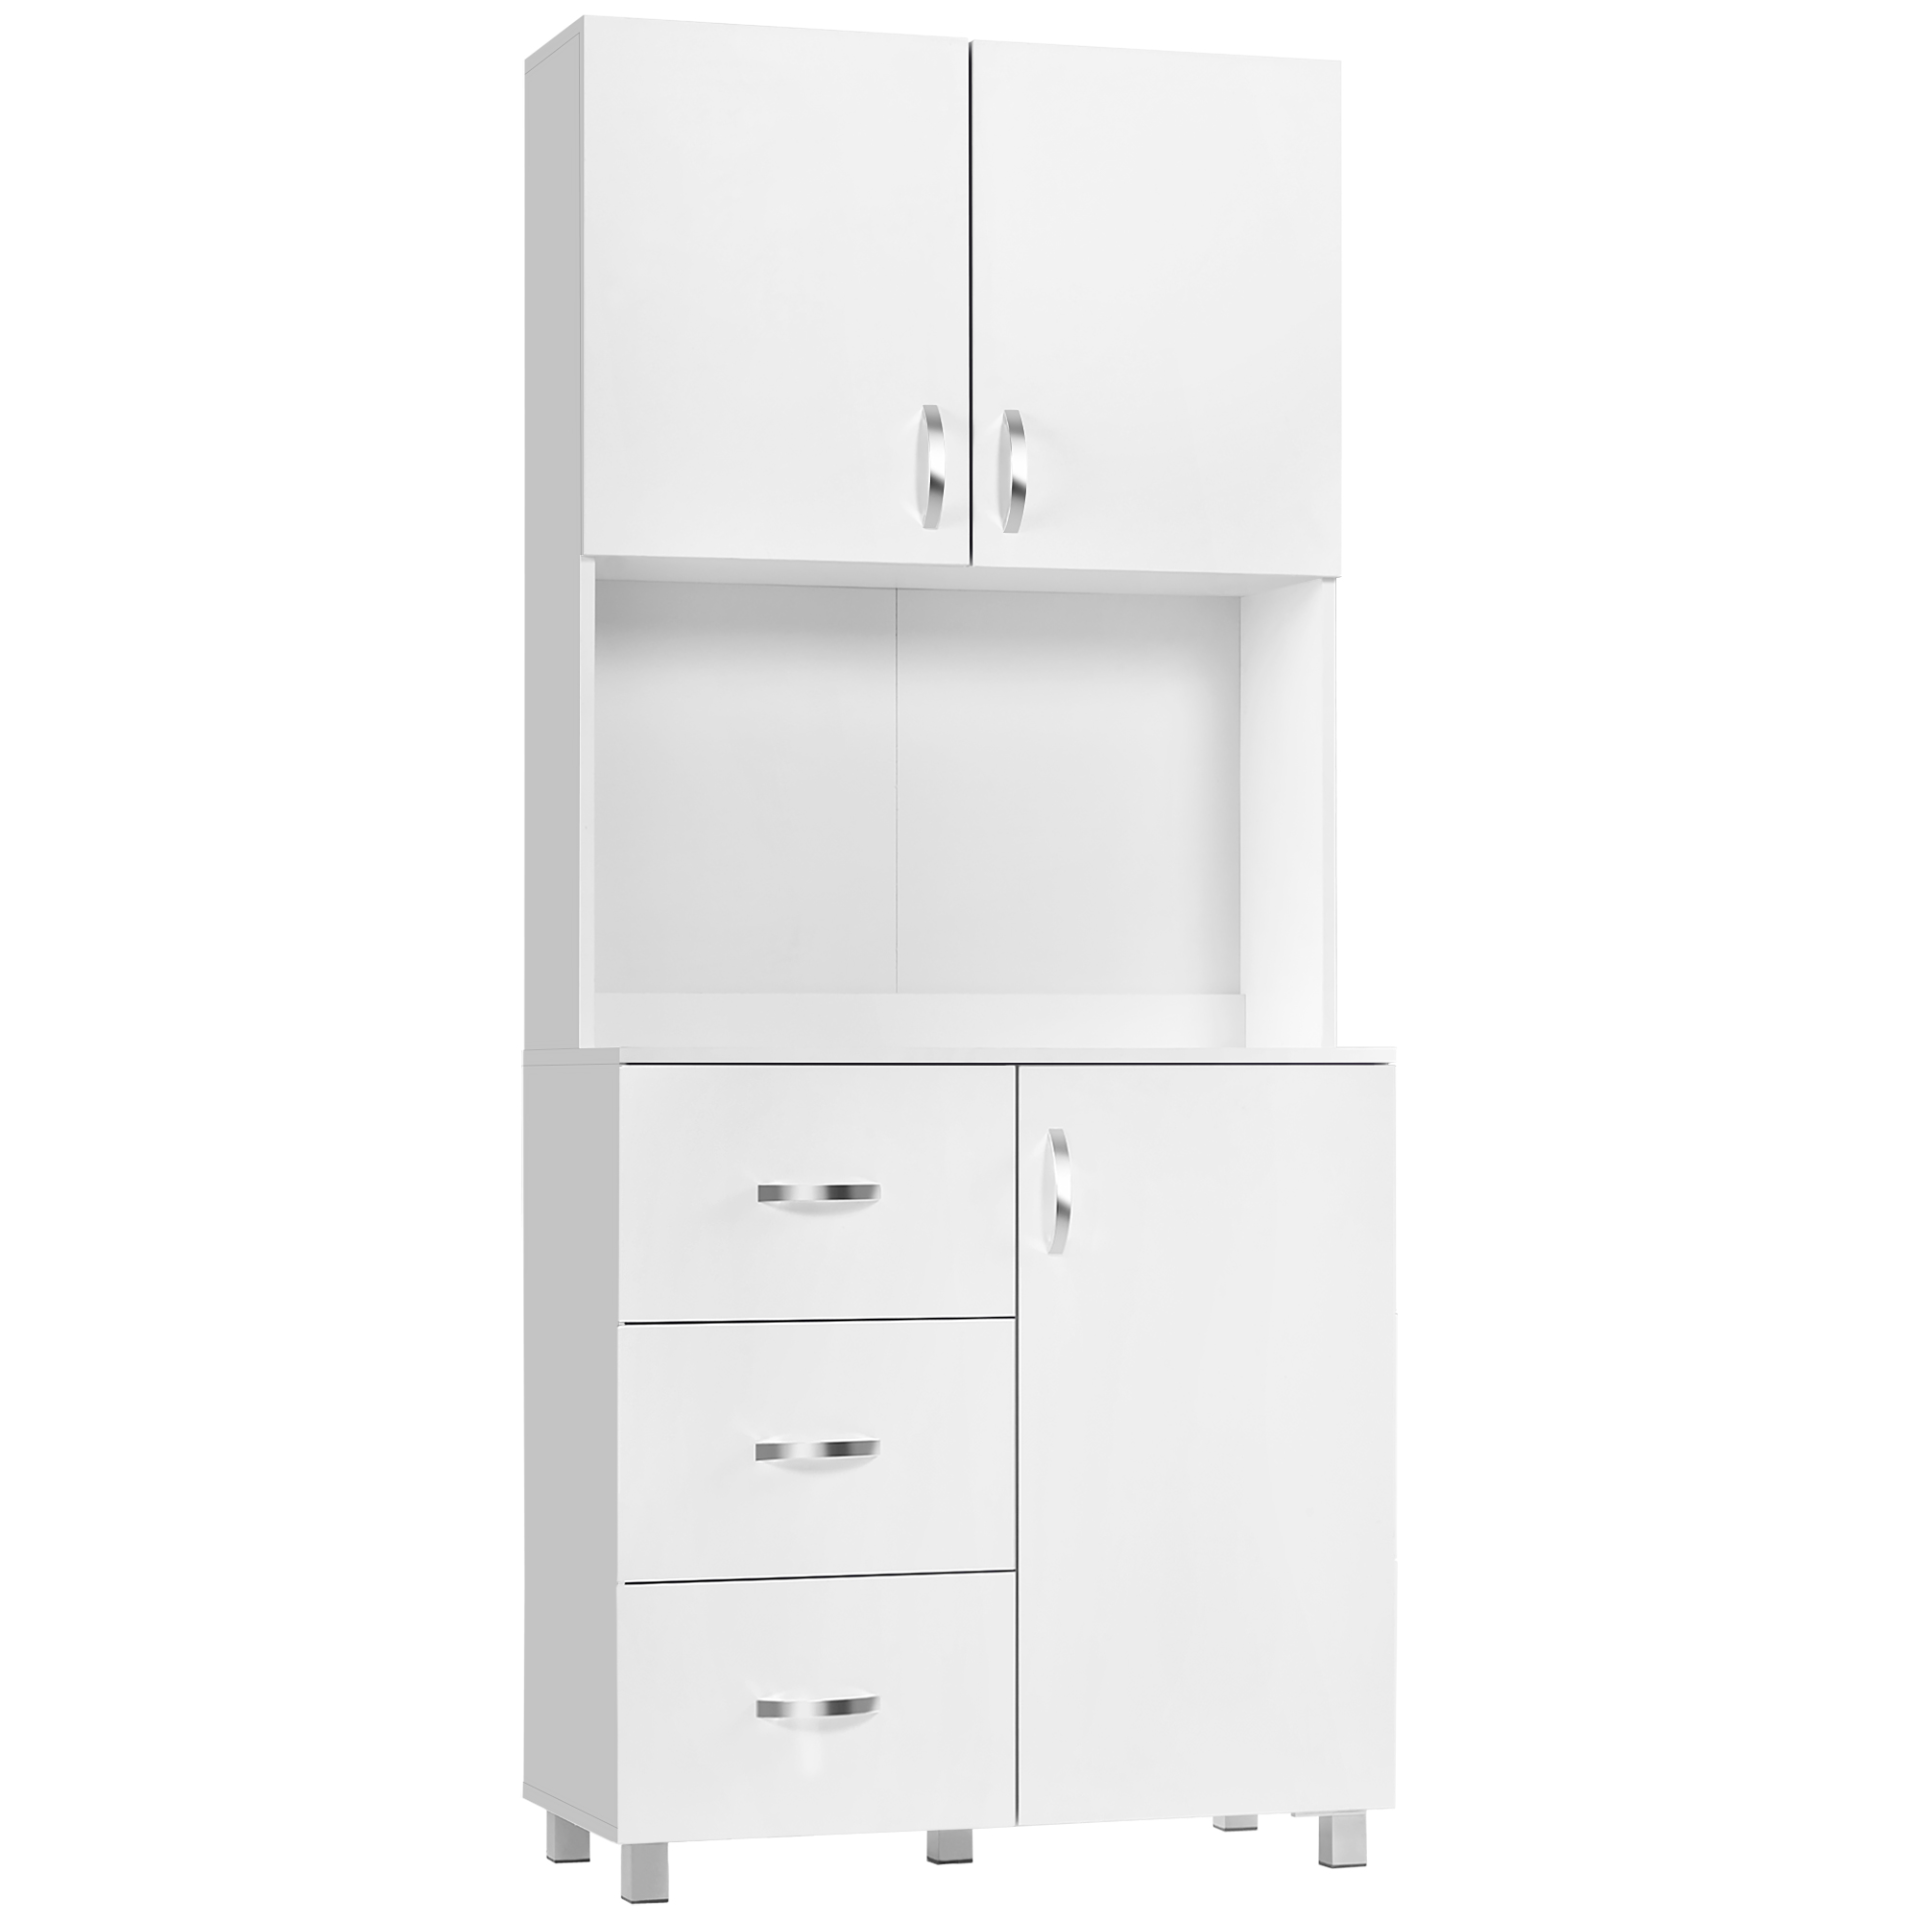 HOMCOM Free standing Kitchen Cupboard Storage Cabinet with Doors and Sheleves